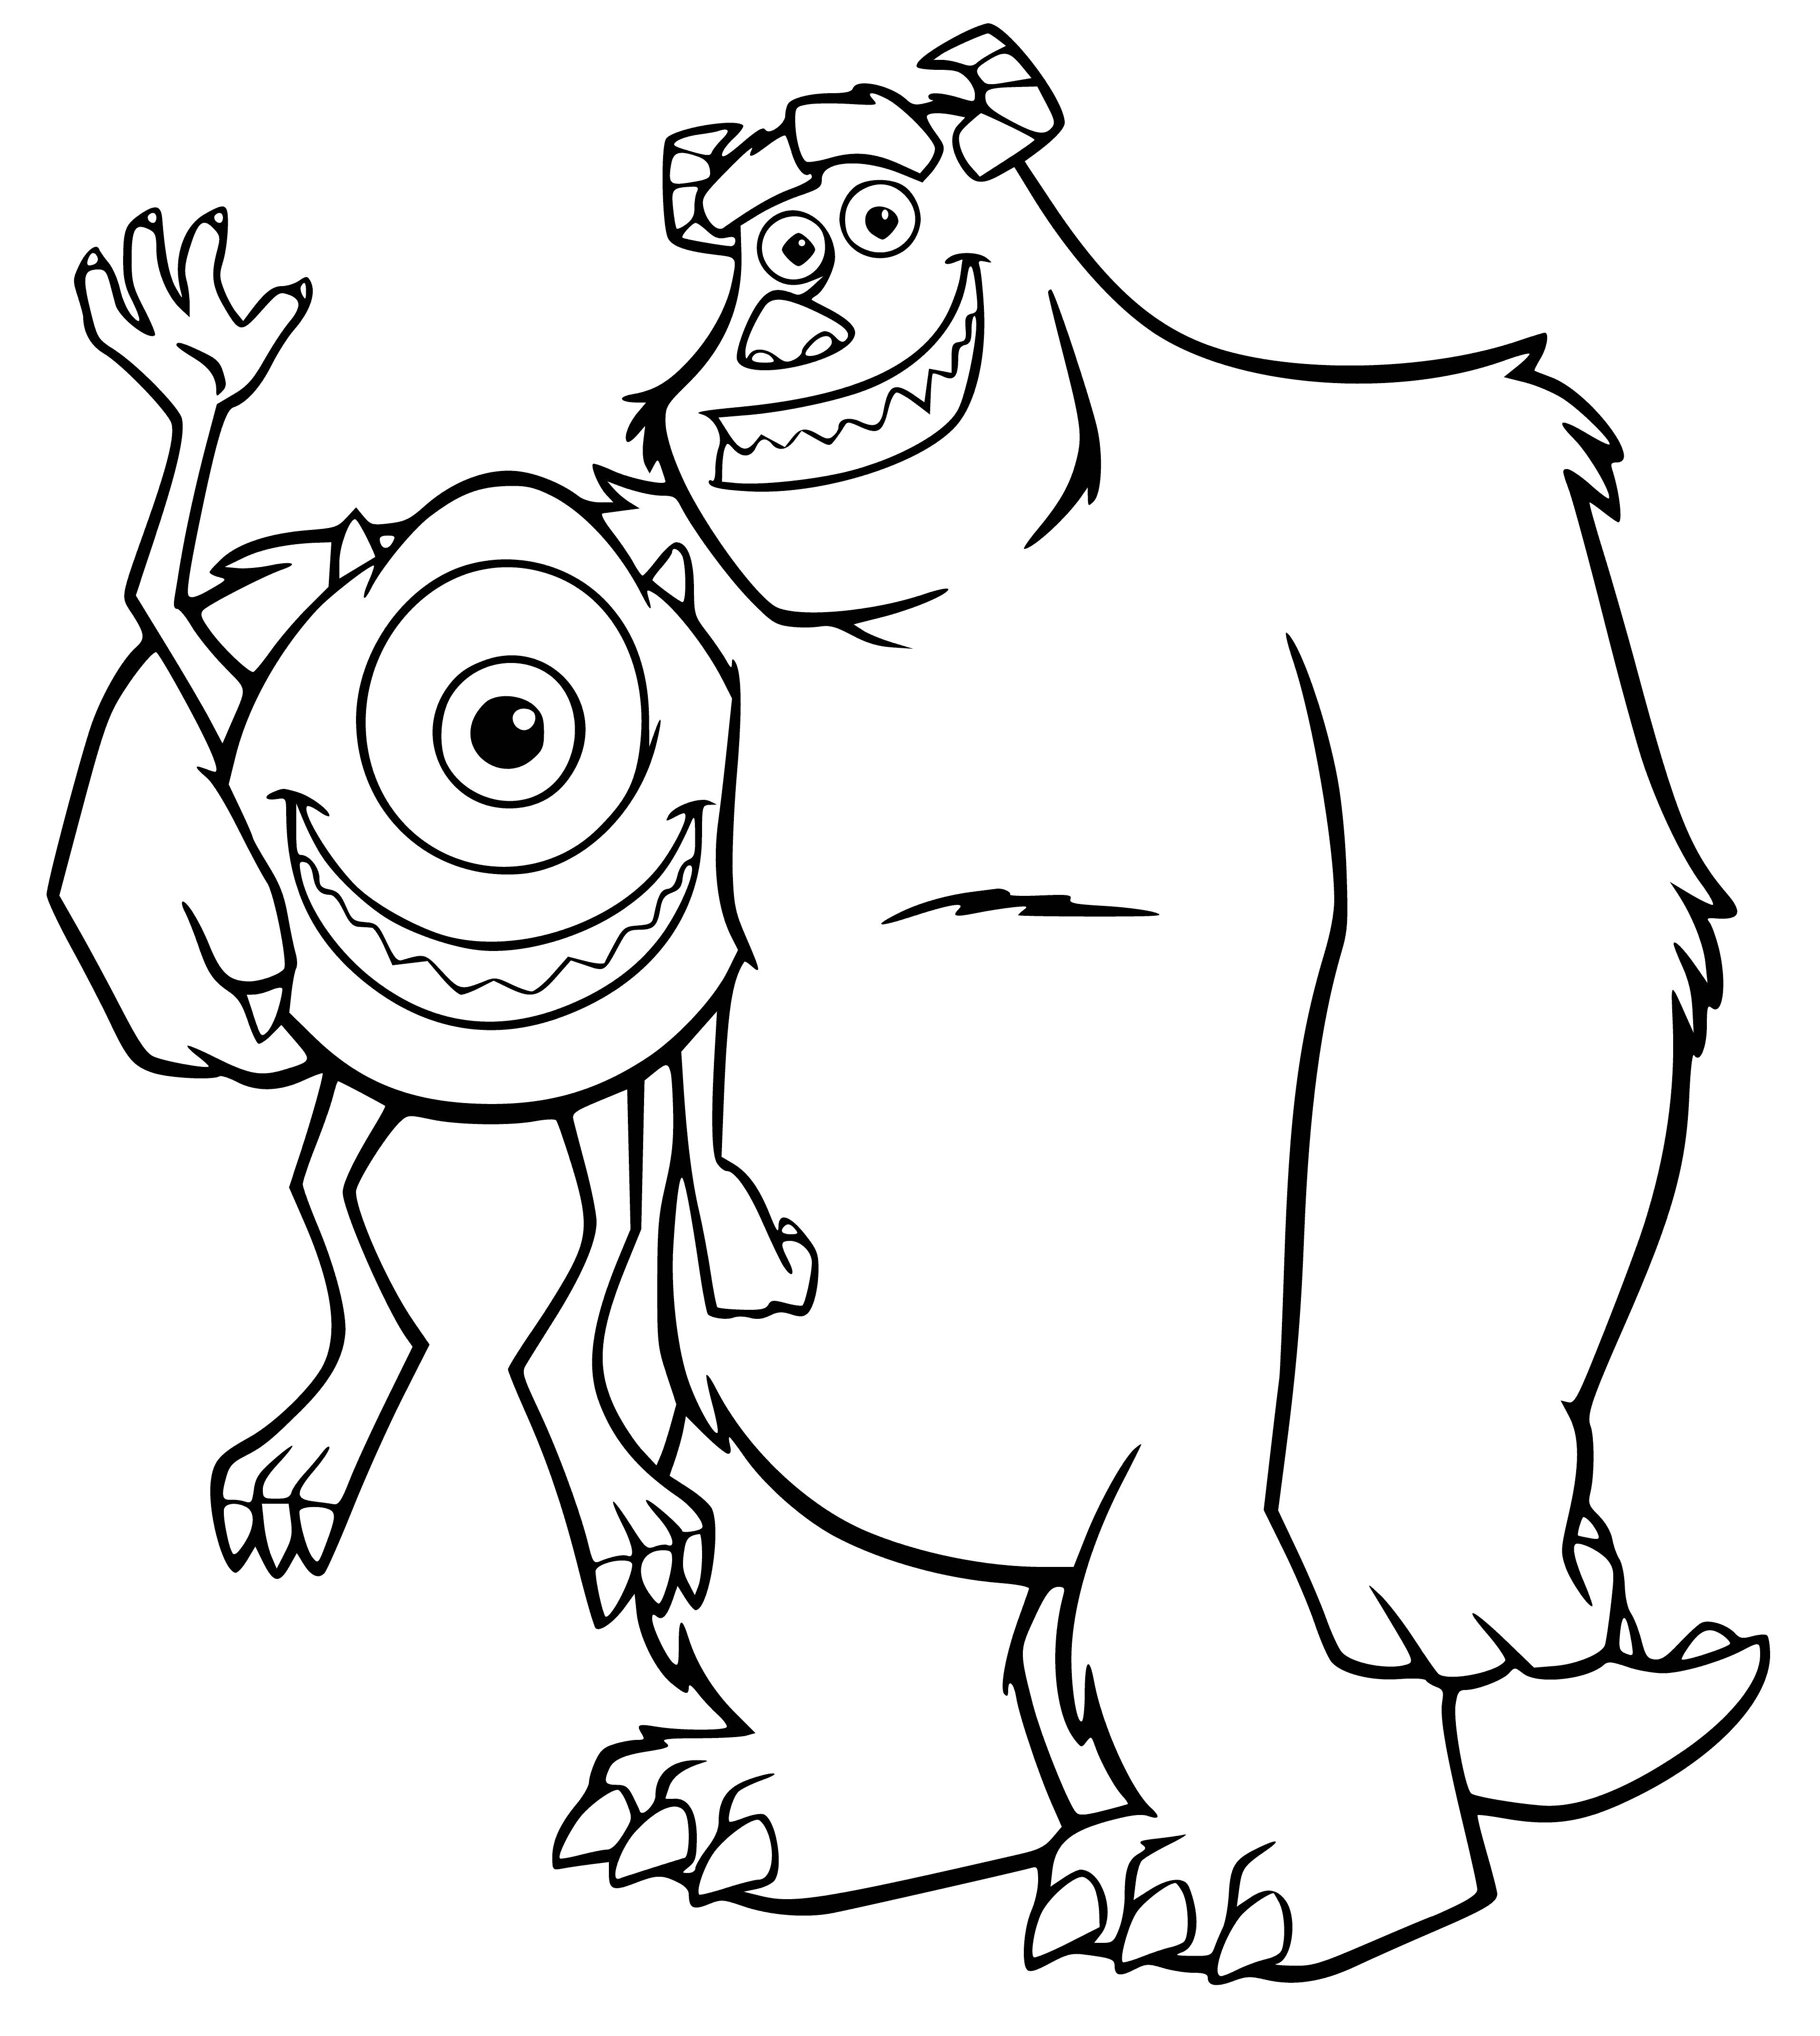 Mike and Sally coloring page